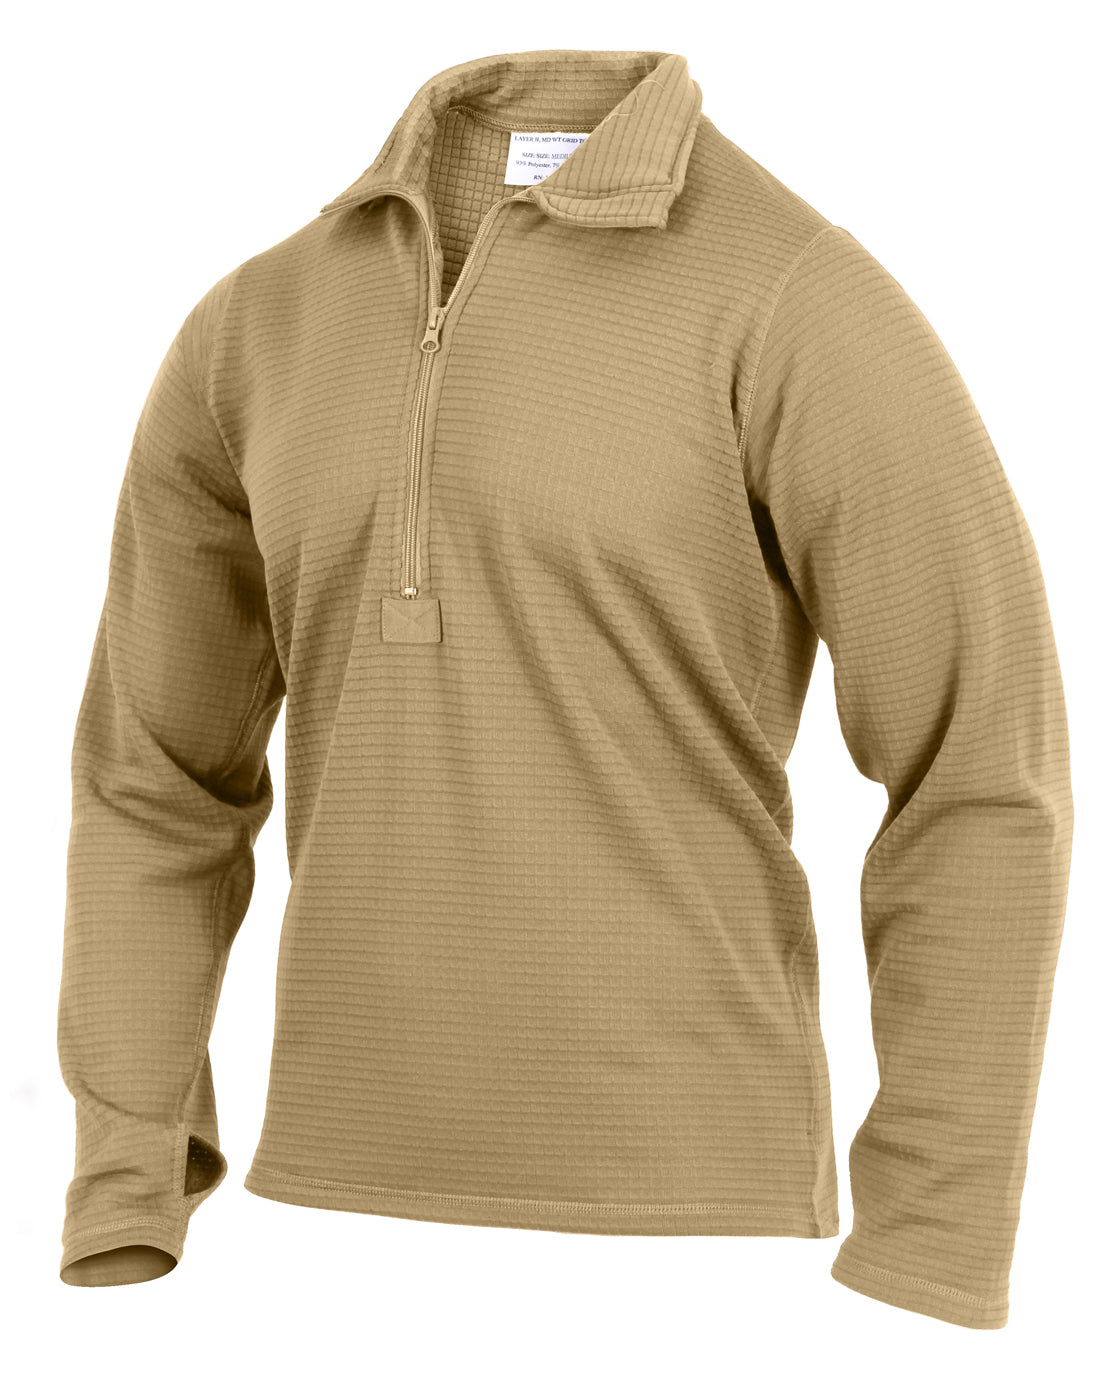 AR-670-1 Coyote Brown Cold Weather Base Layer Winter Shirt Top